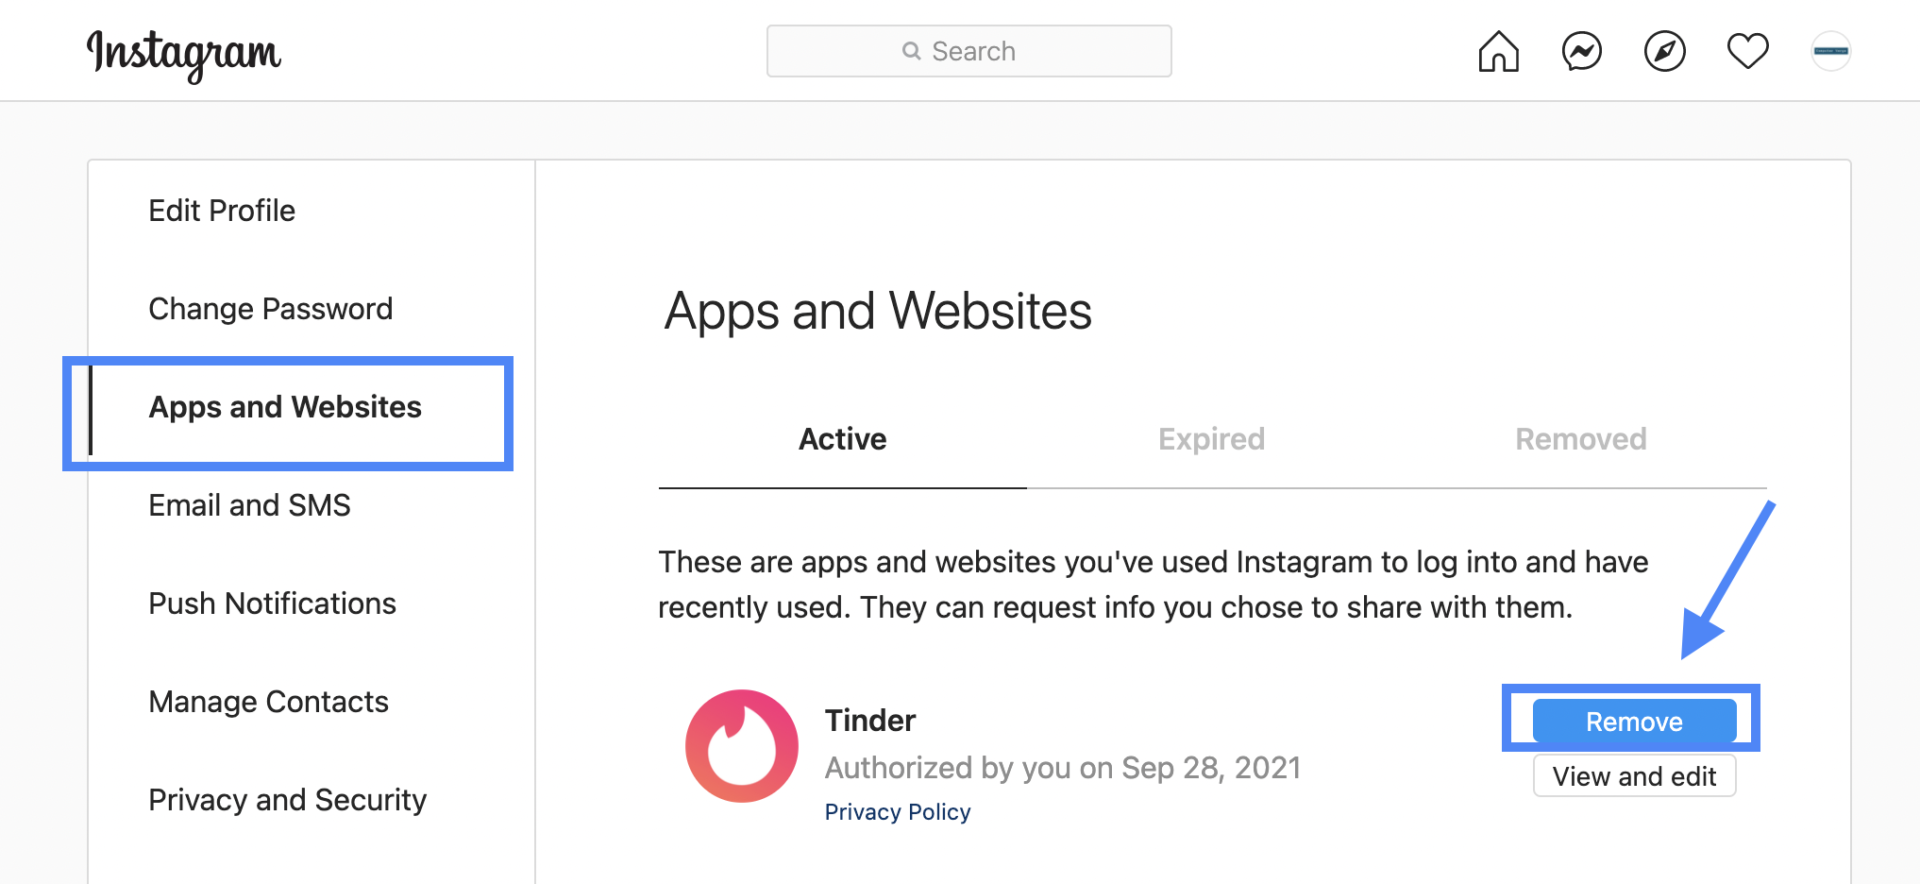 Removing Tinder from IG Apps and Websites